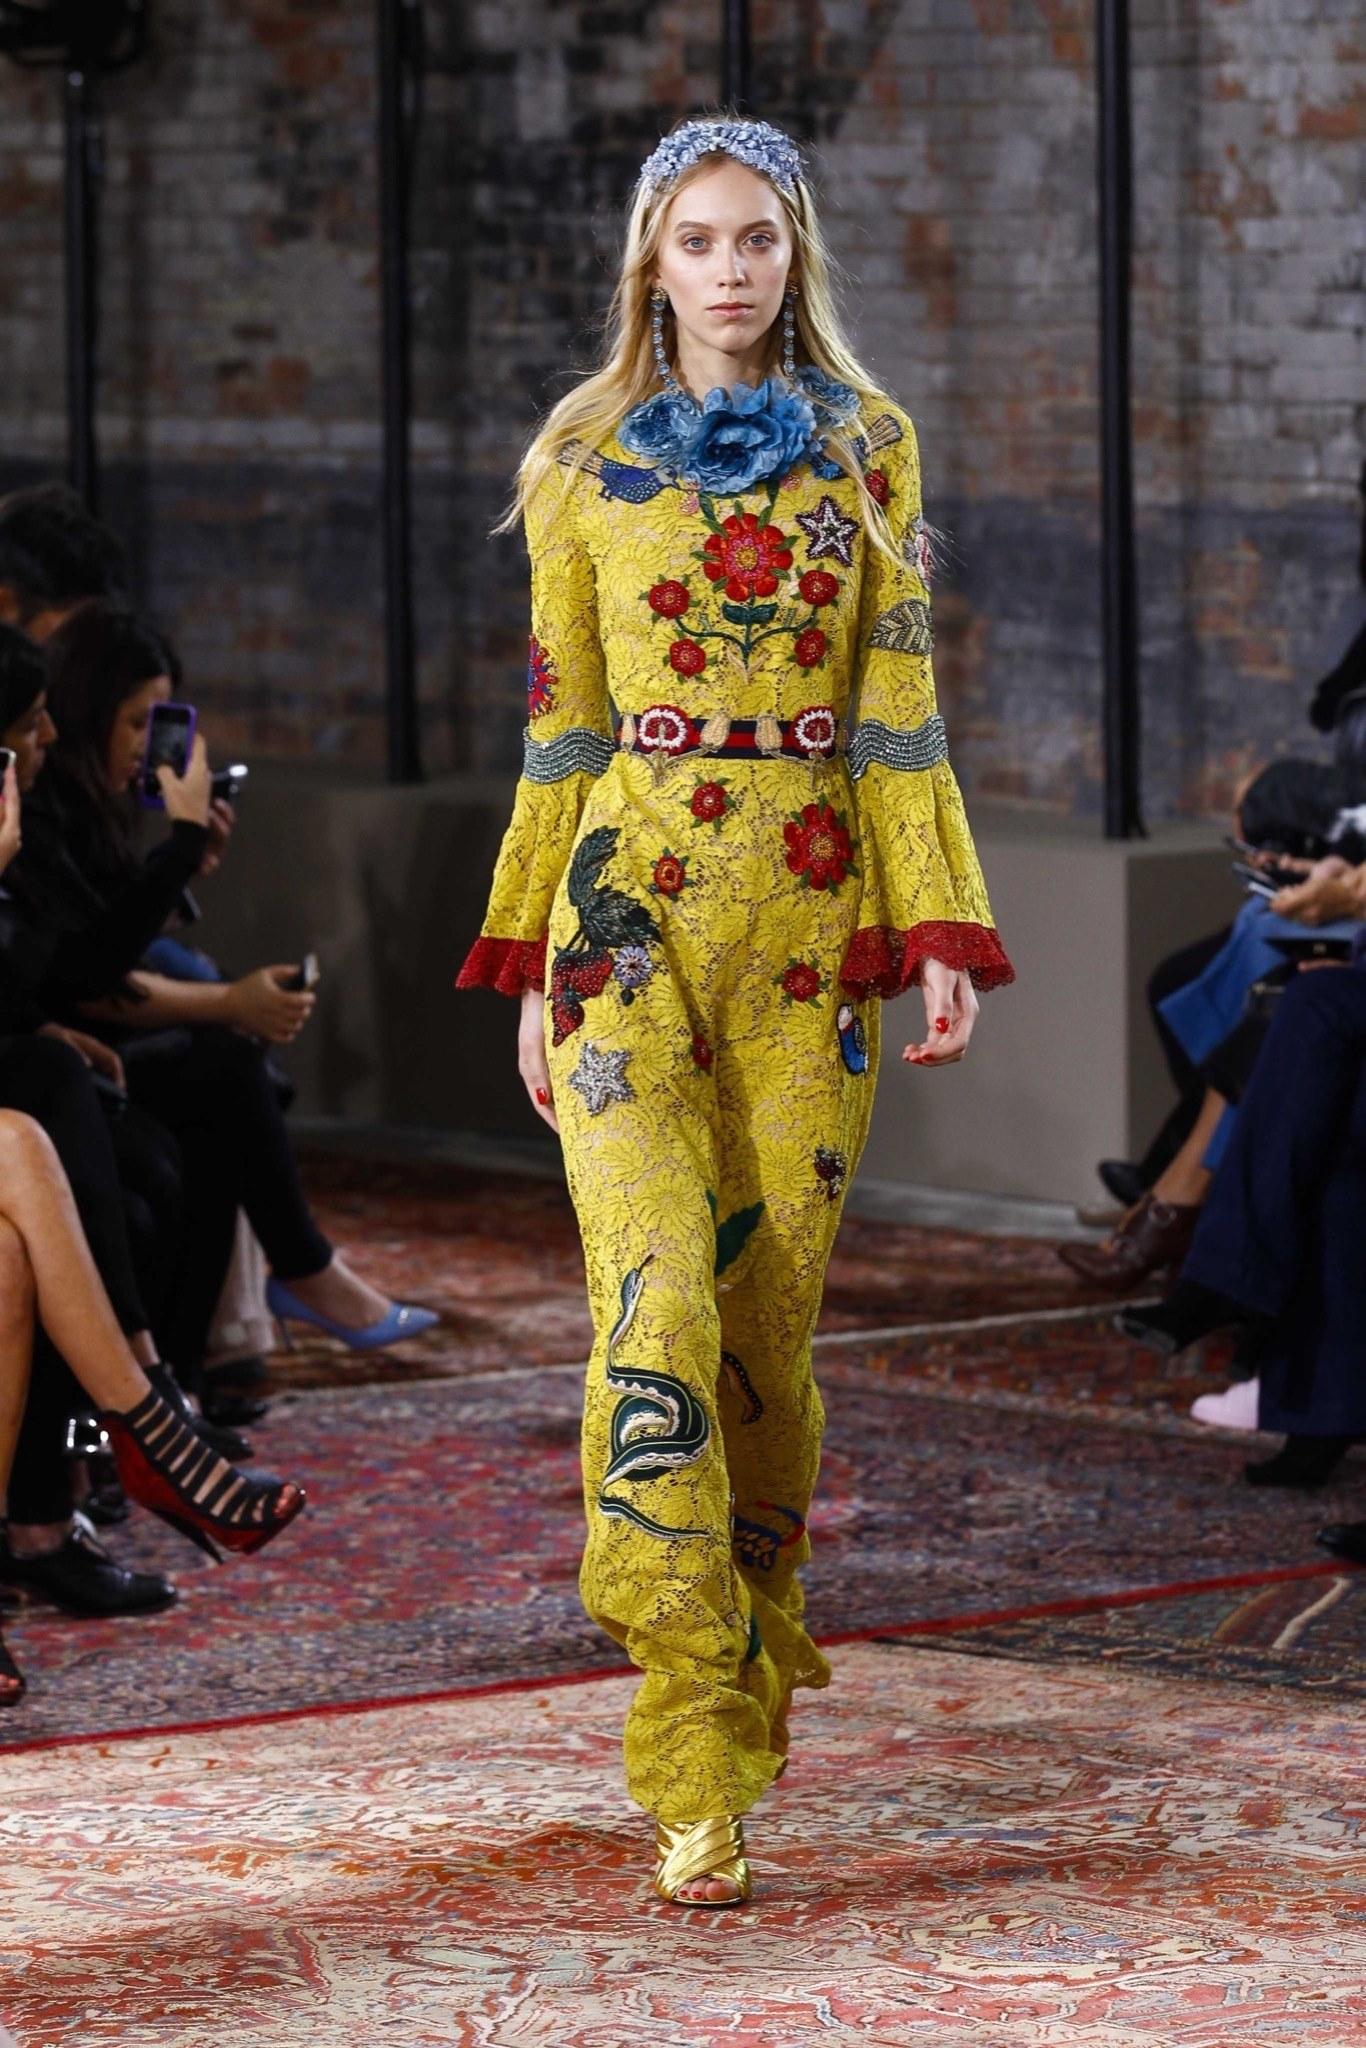 This fabulous Gucci Cruise 2016 Collection statement gown / dress retailed at $21,000.00 - comes in chartreuse yellow lace and features a round neck with detachable blue flower brooch, symmetrical blue bird and floral patches, bell sleeves with